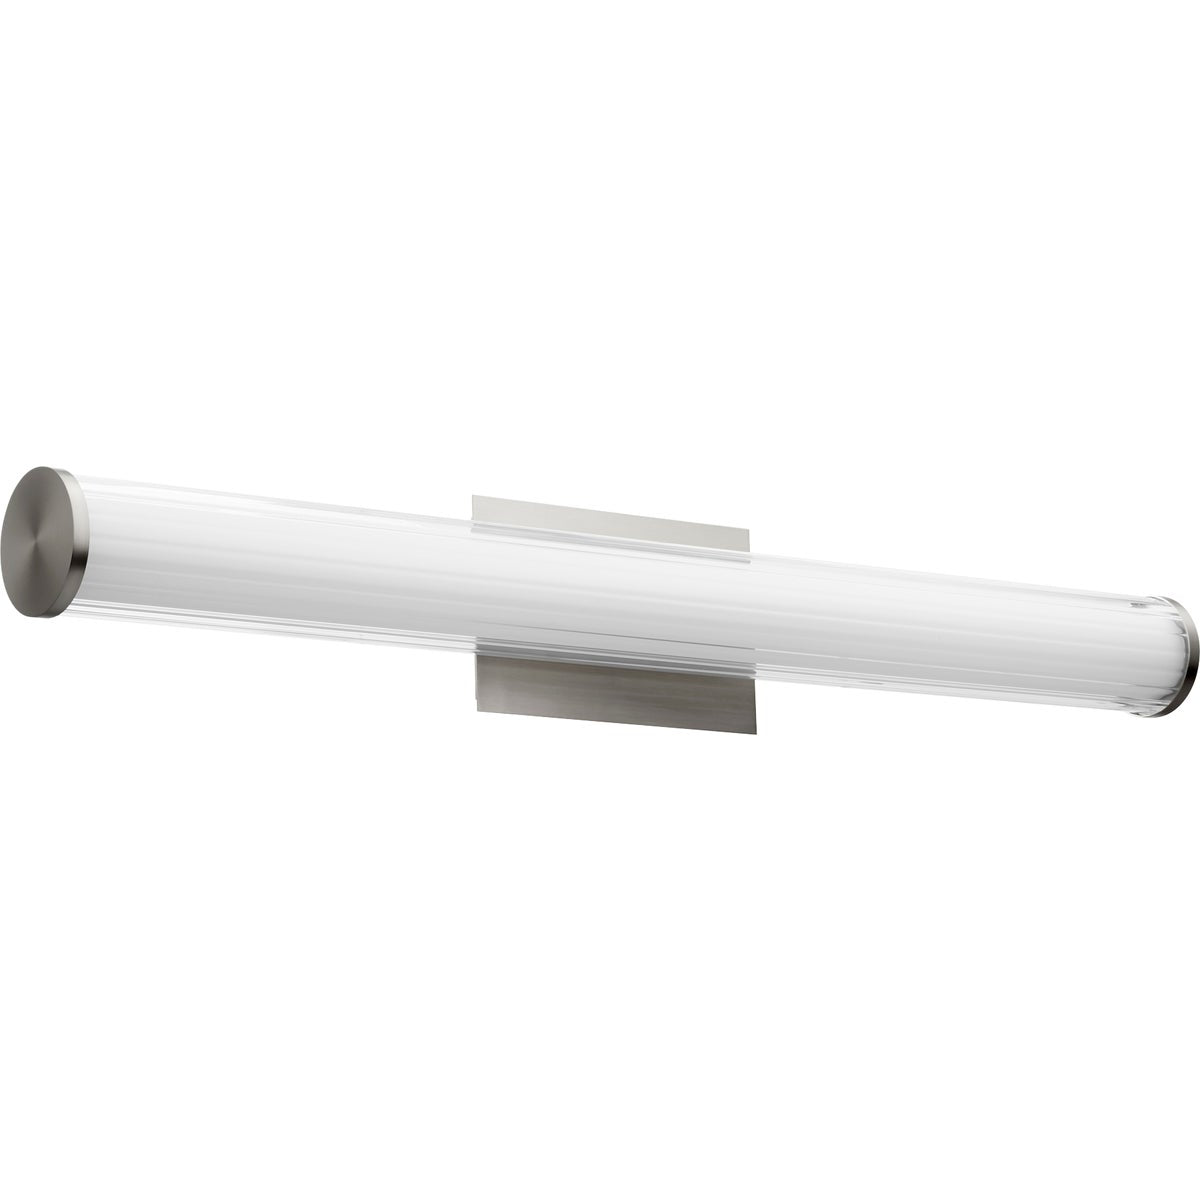 LED Vanity Light - A sleek cylinder-shaped fixture with clean lines and modern simplicity. Perfect for any residential space. 26W, 120V, LED. 2205 lumens, 3000K color temperature, CRI 90. Dimmable. UL Listed. 34.5"W x 5.25"H x 3.75"E. 2-year warranty.